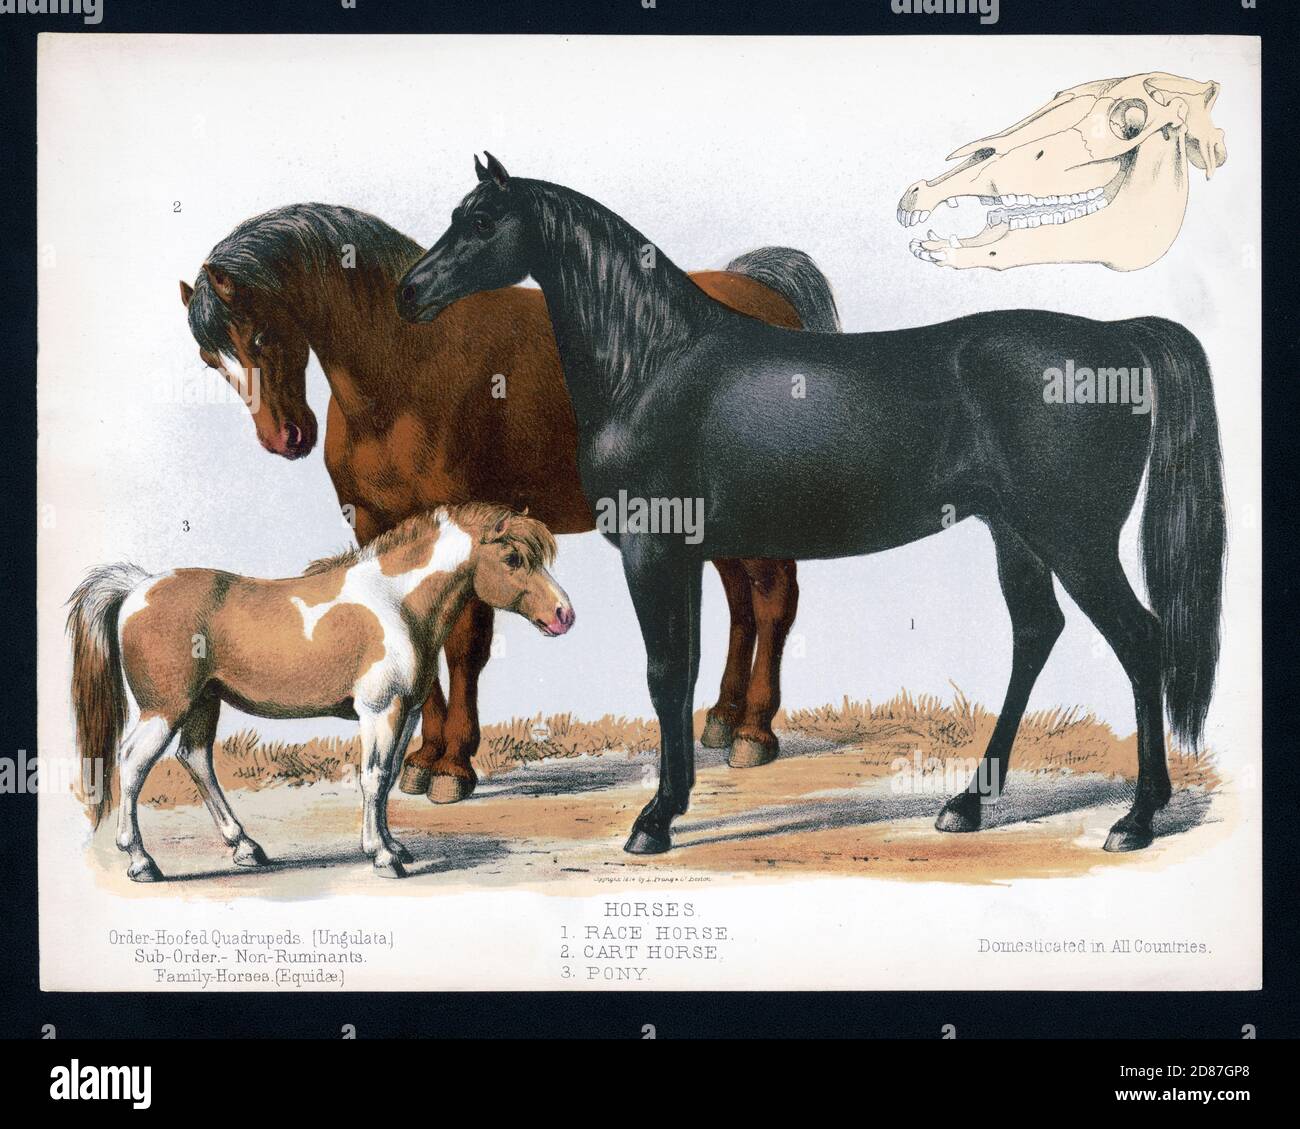 Illustration of Race Horse, Cart Horse and a Pony Stock Photo